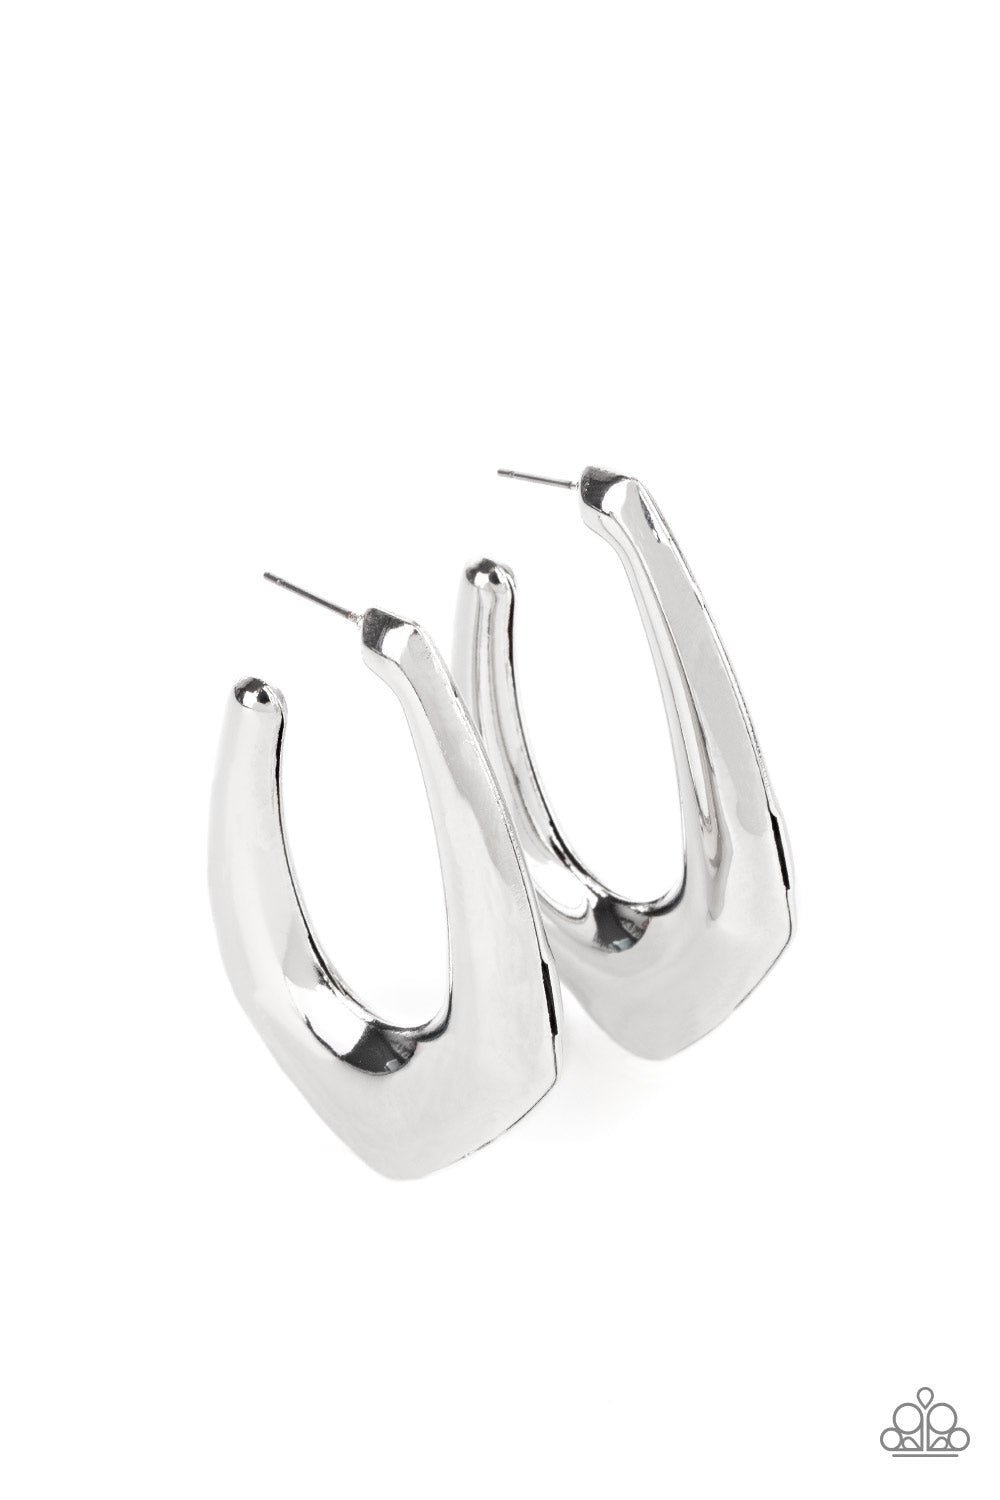 Find Your Anchor - Silver Hoop Earrings - Paparazzi Accessories - Two silver frames join into a beveled anchor shaped hoop, creating a bold pop of metallic shimmer. Earring attaches to a standard post fitting. Hoop measures approximately 1 1/4" in diameter. Sold as one pair of hoop earrings.